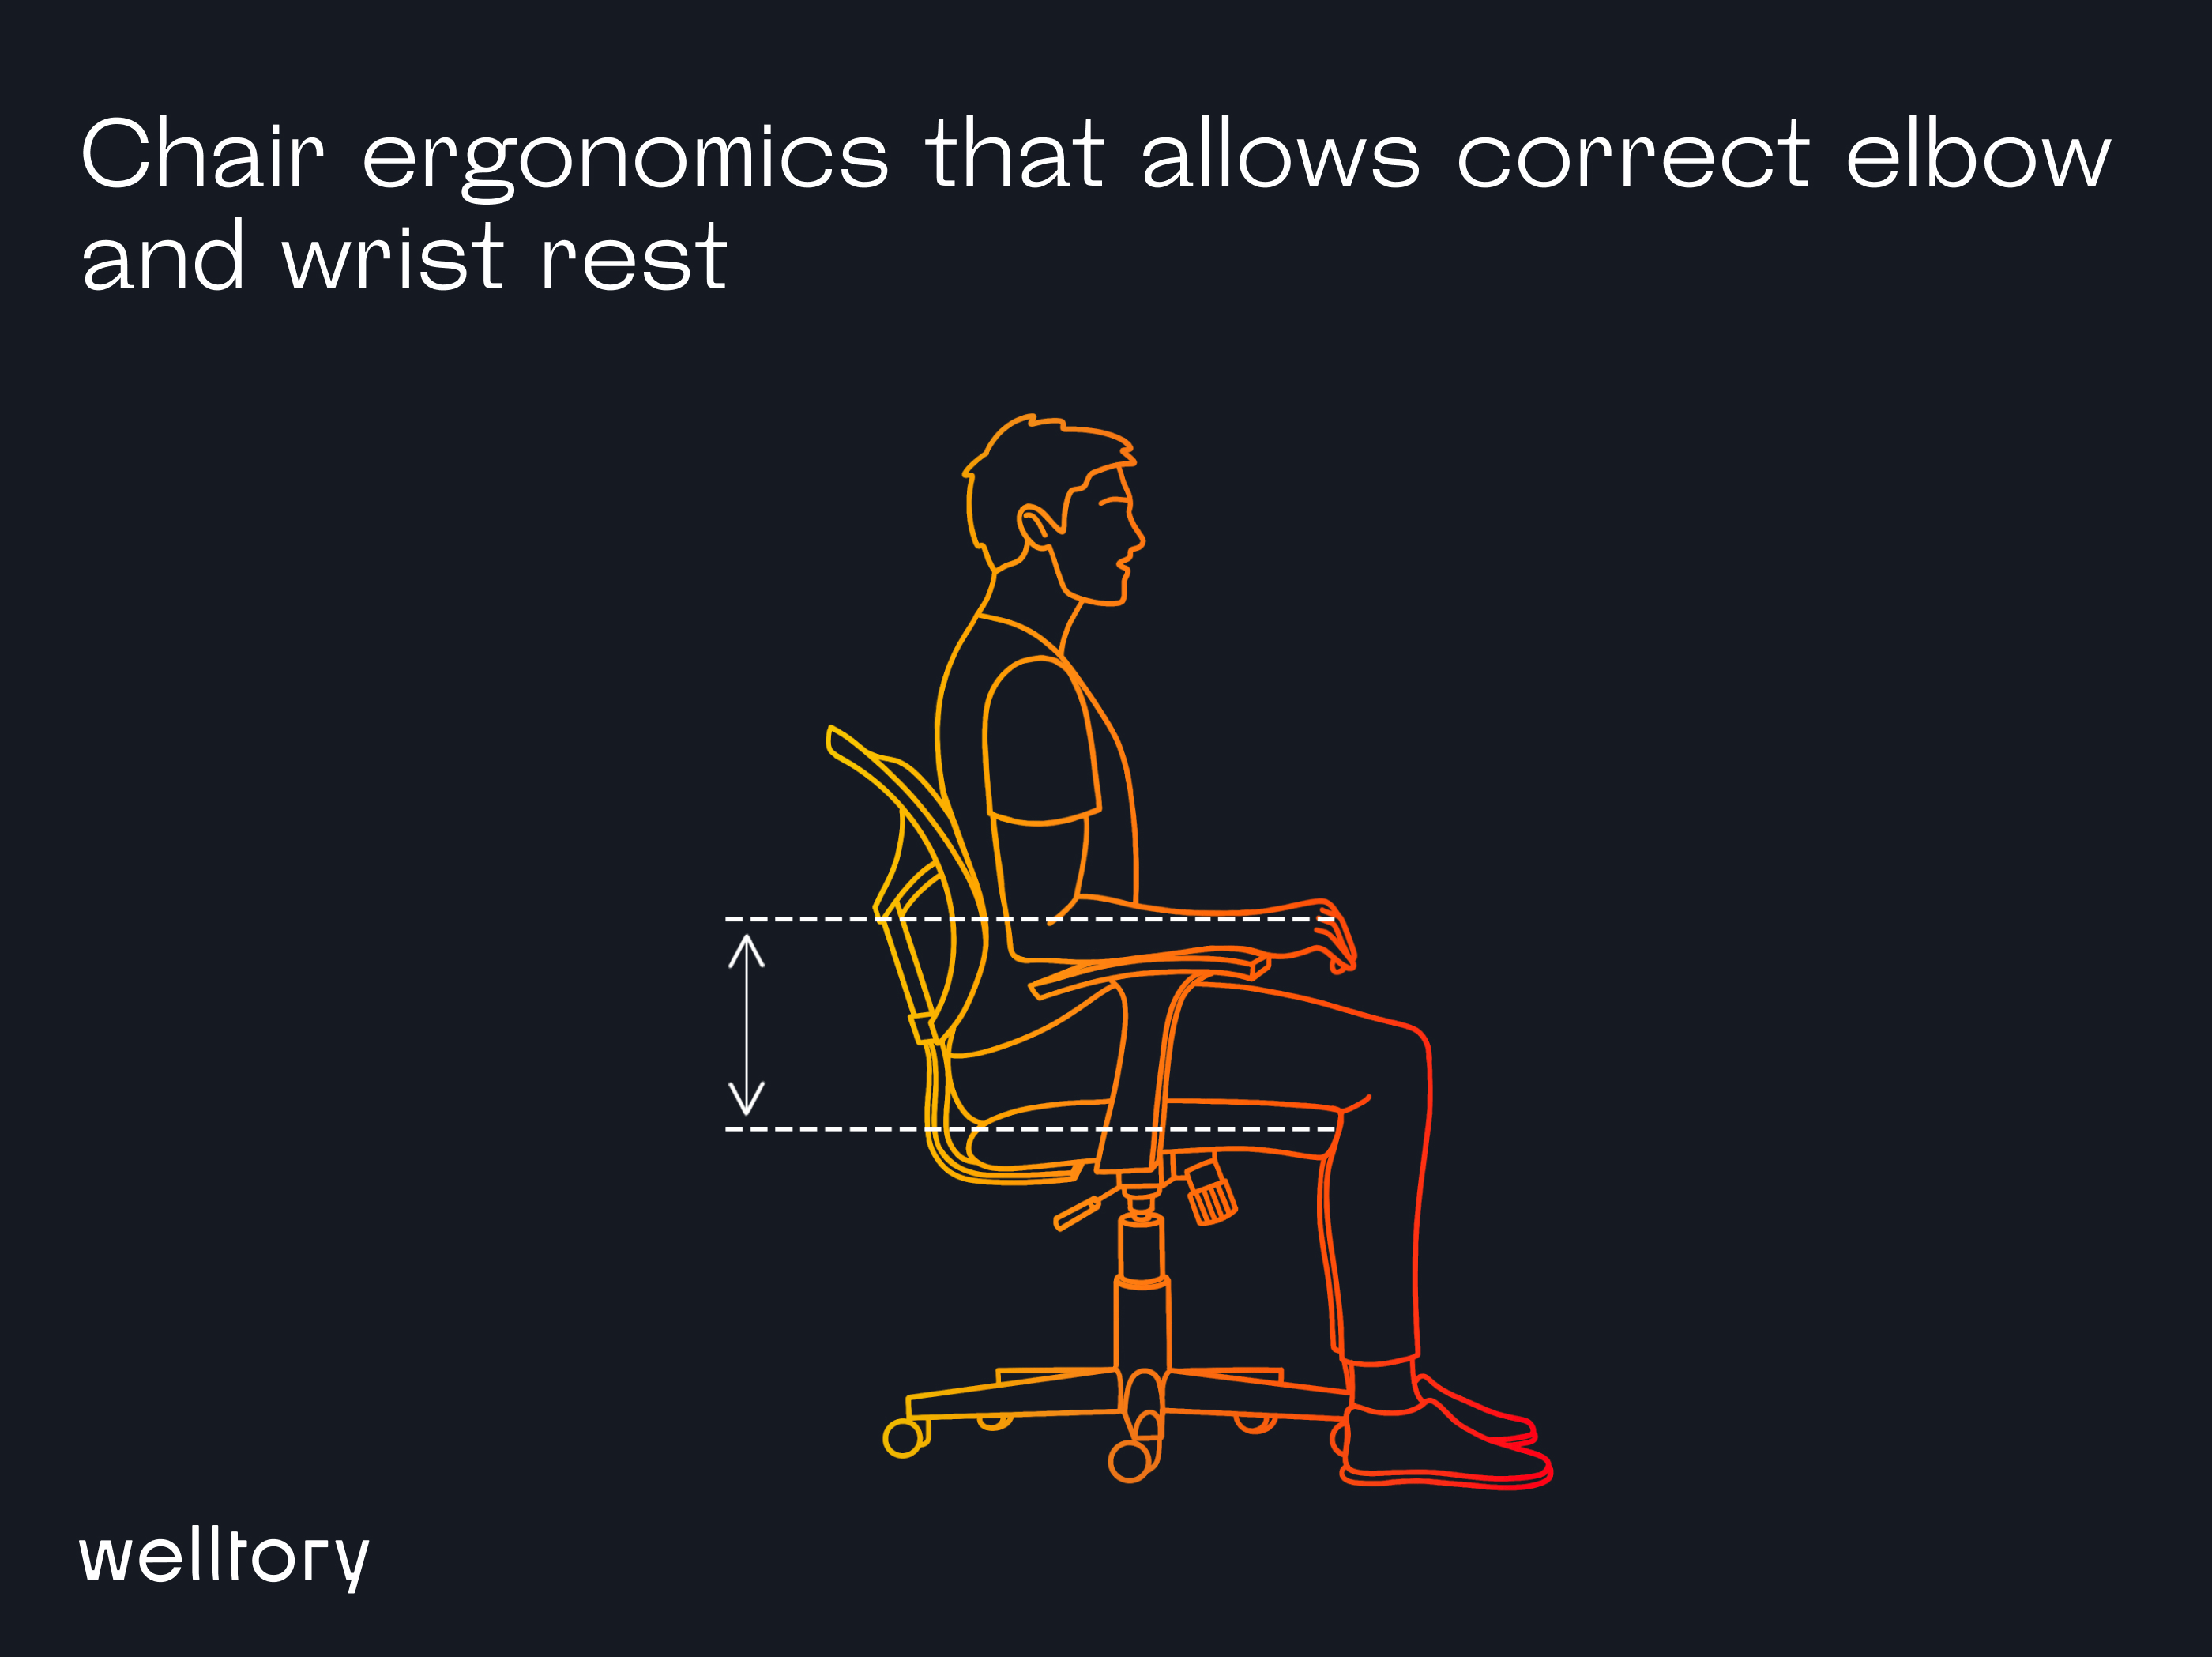 Chair ergonomics that allows correct elbow and wrist rest